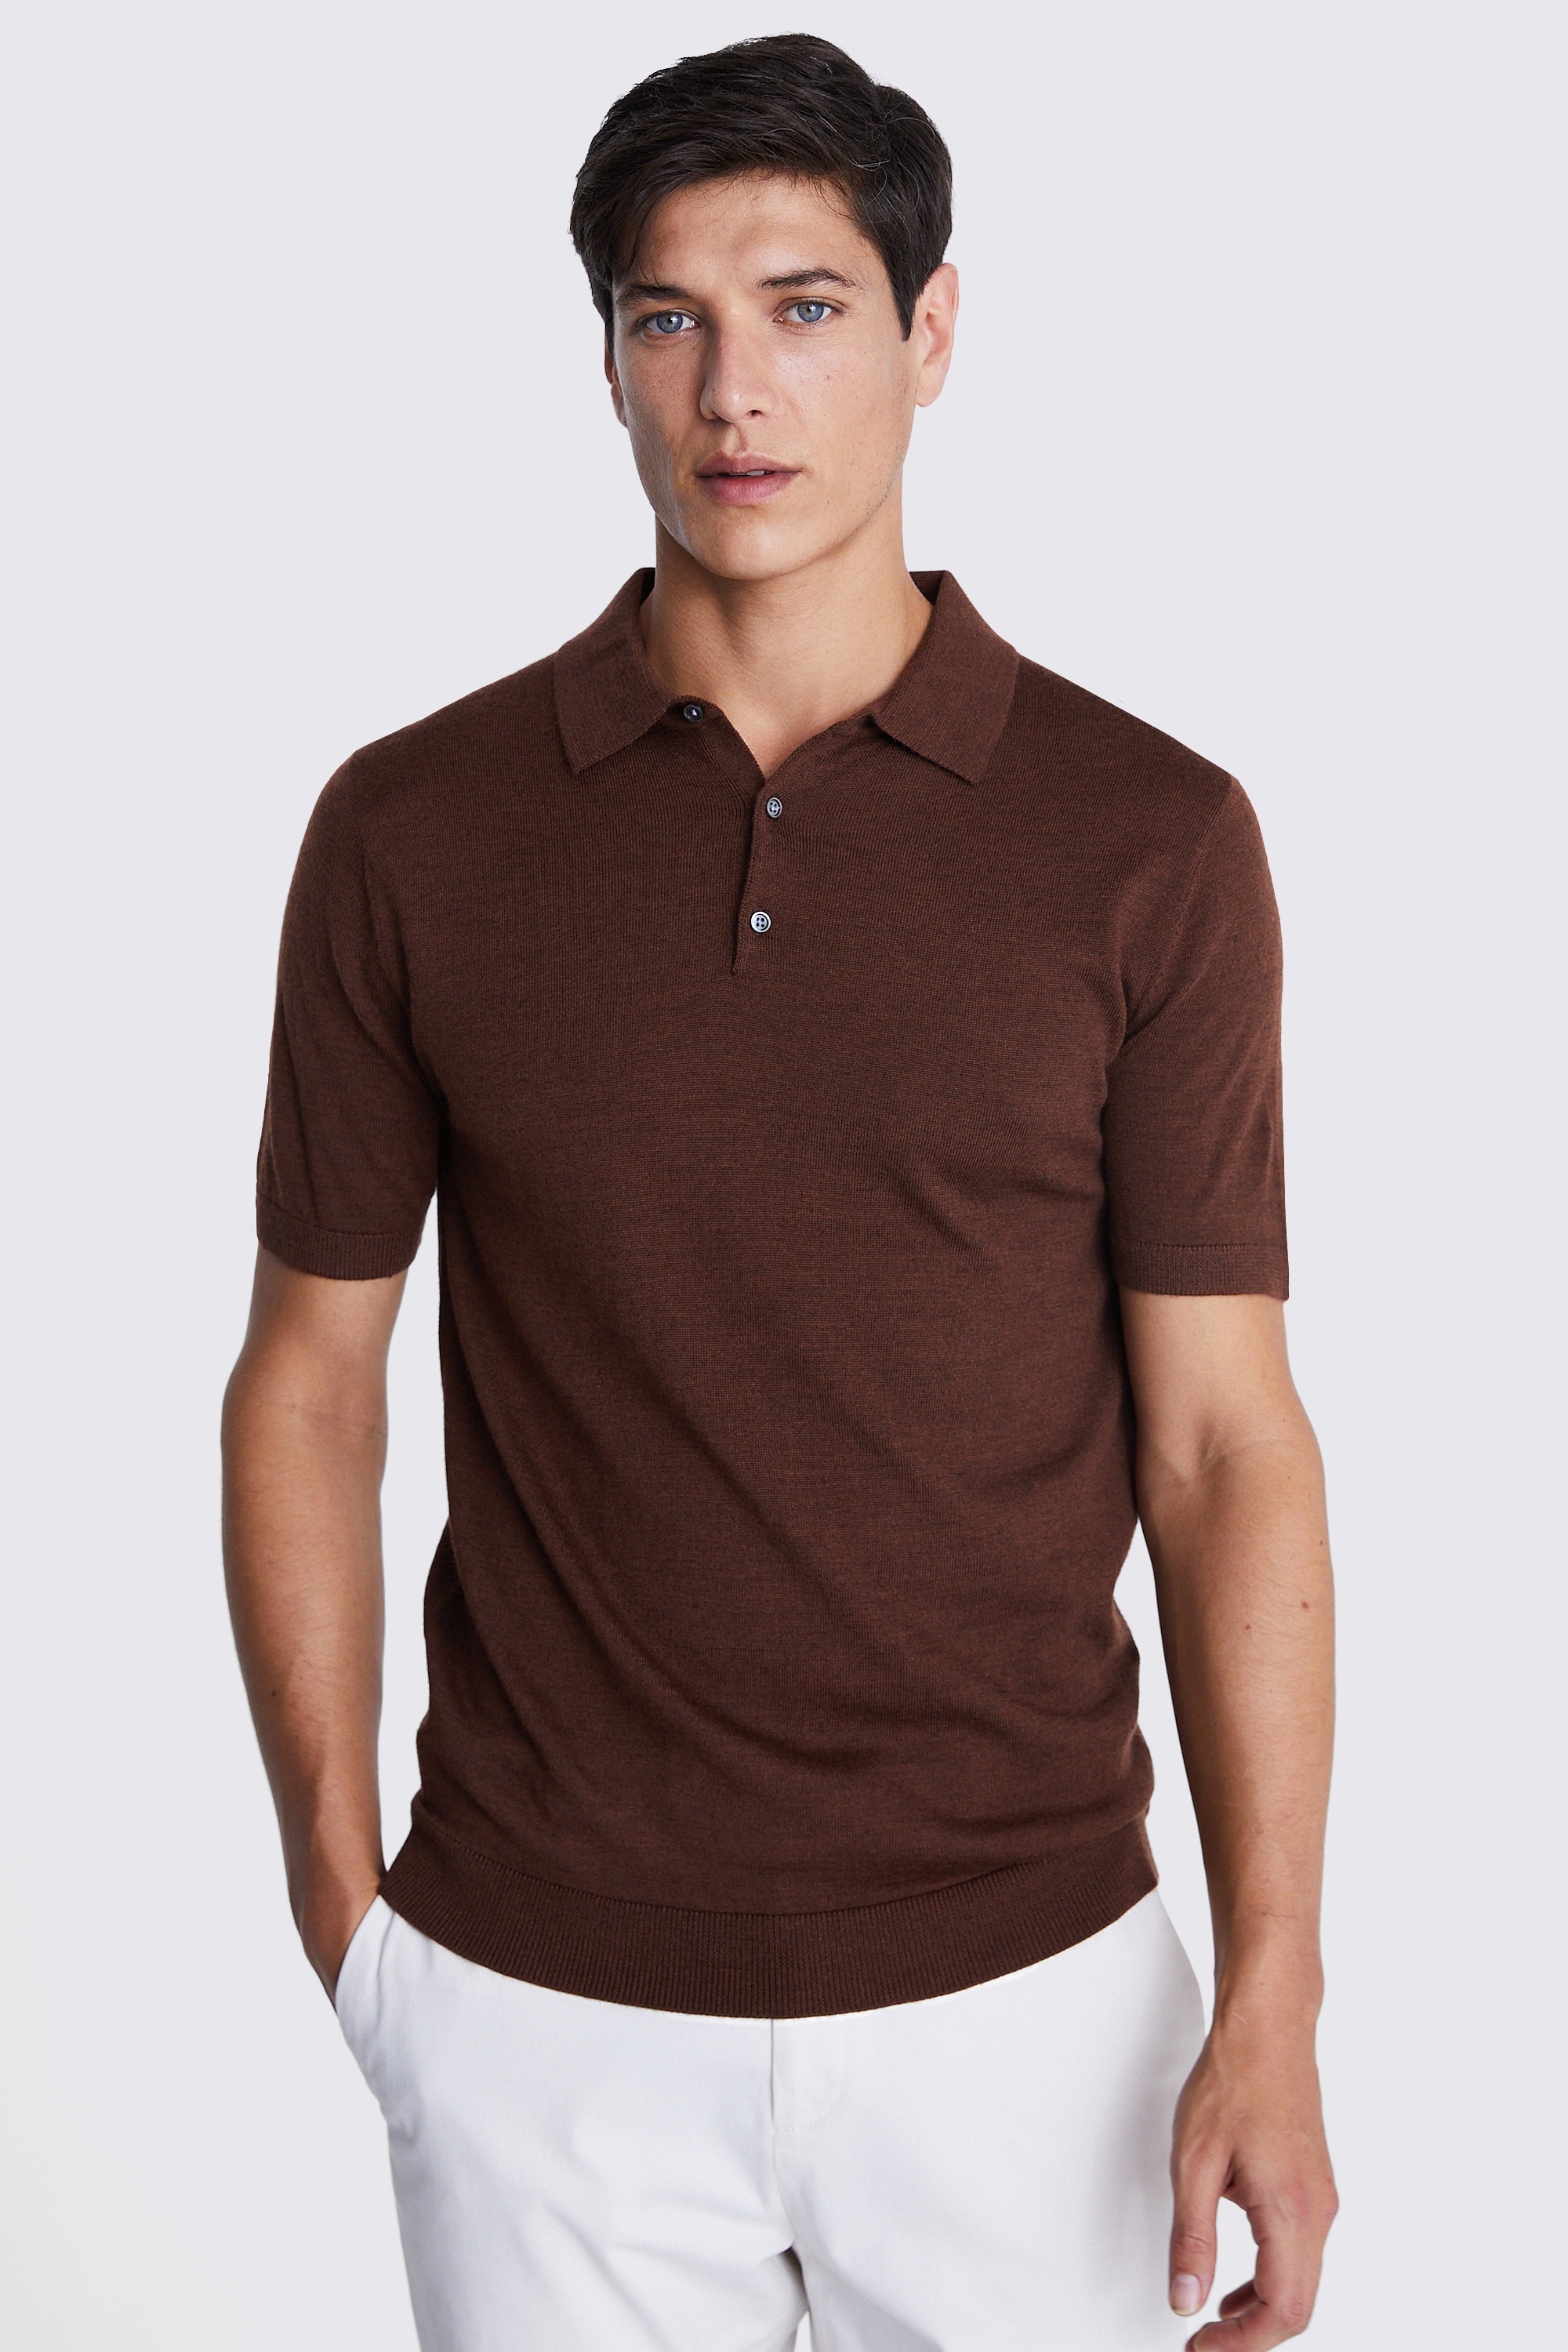 Rust Merino 3 Button Polo Shirt | Buy Online at Moss